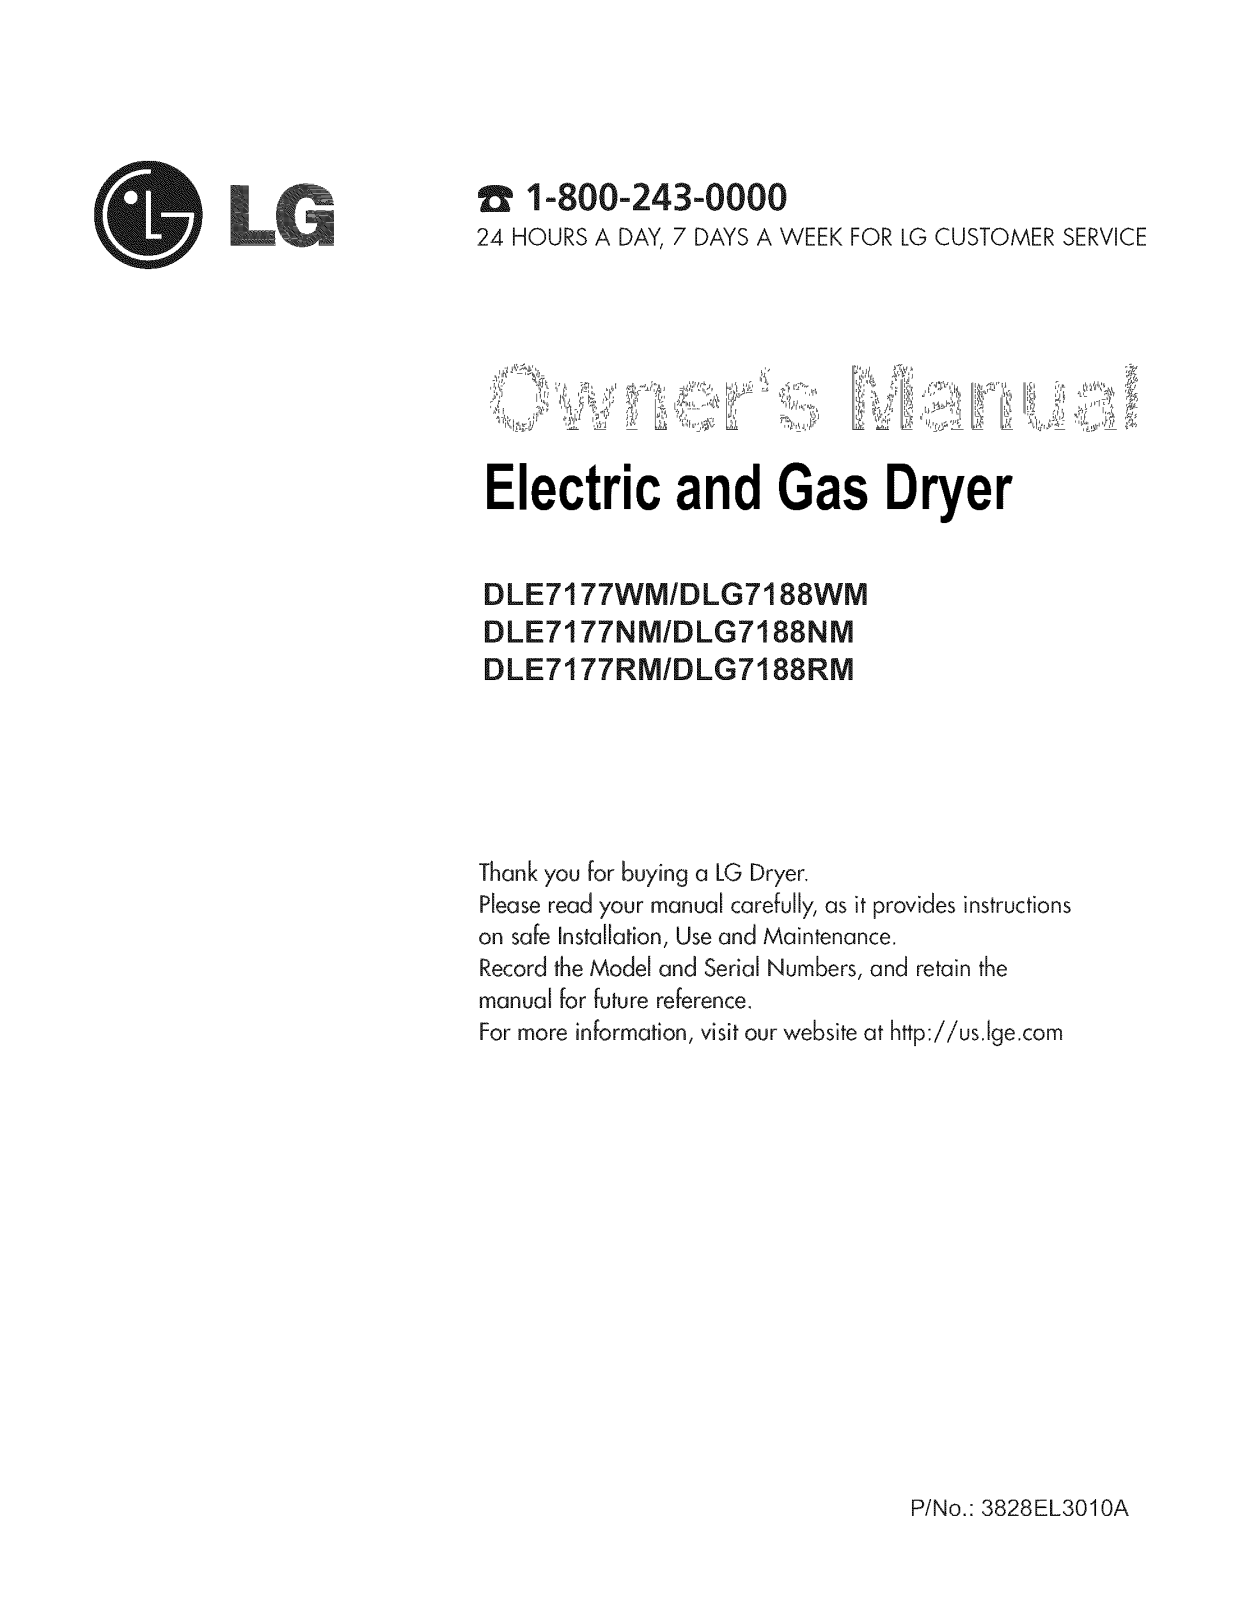 LG DLG7188WM, DLG7188RM, DLE7177WM, DLE7177RM Owner’s Manual